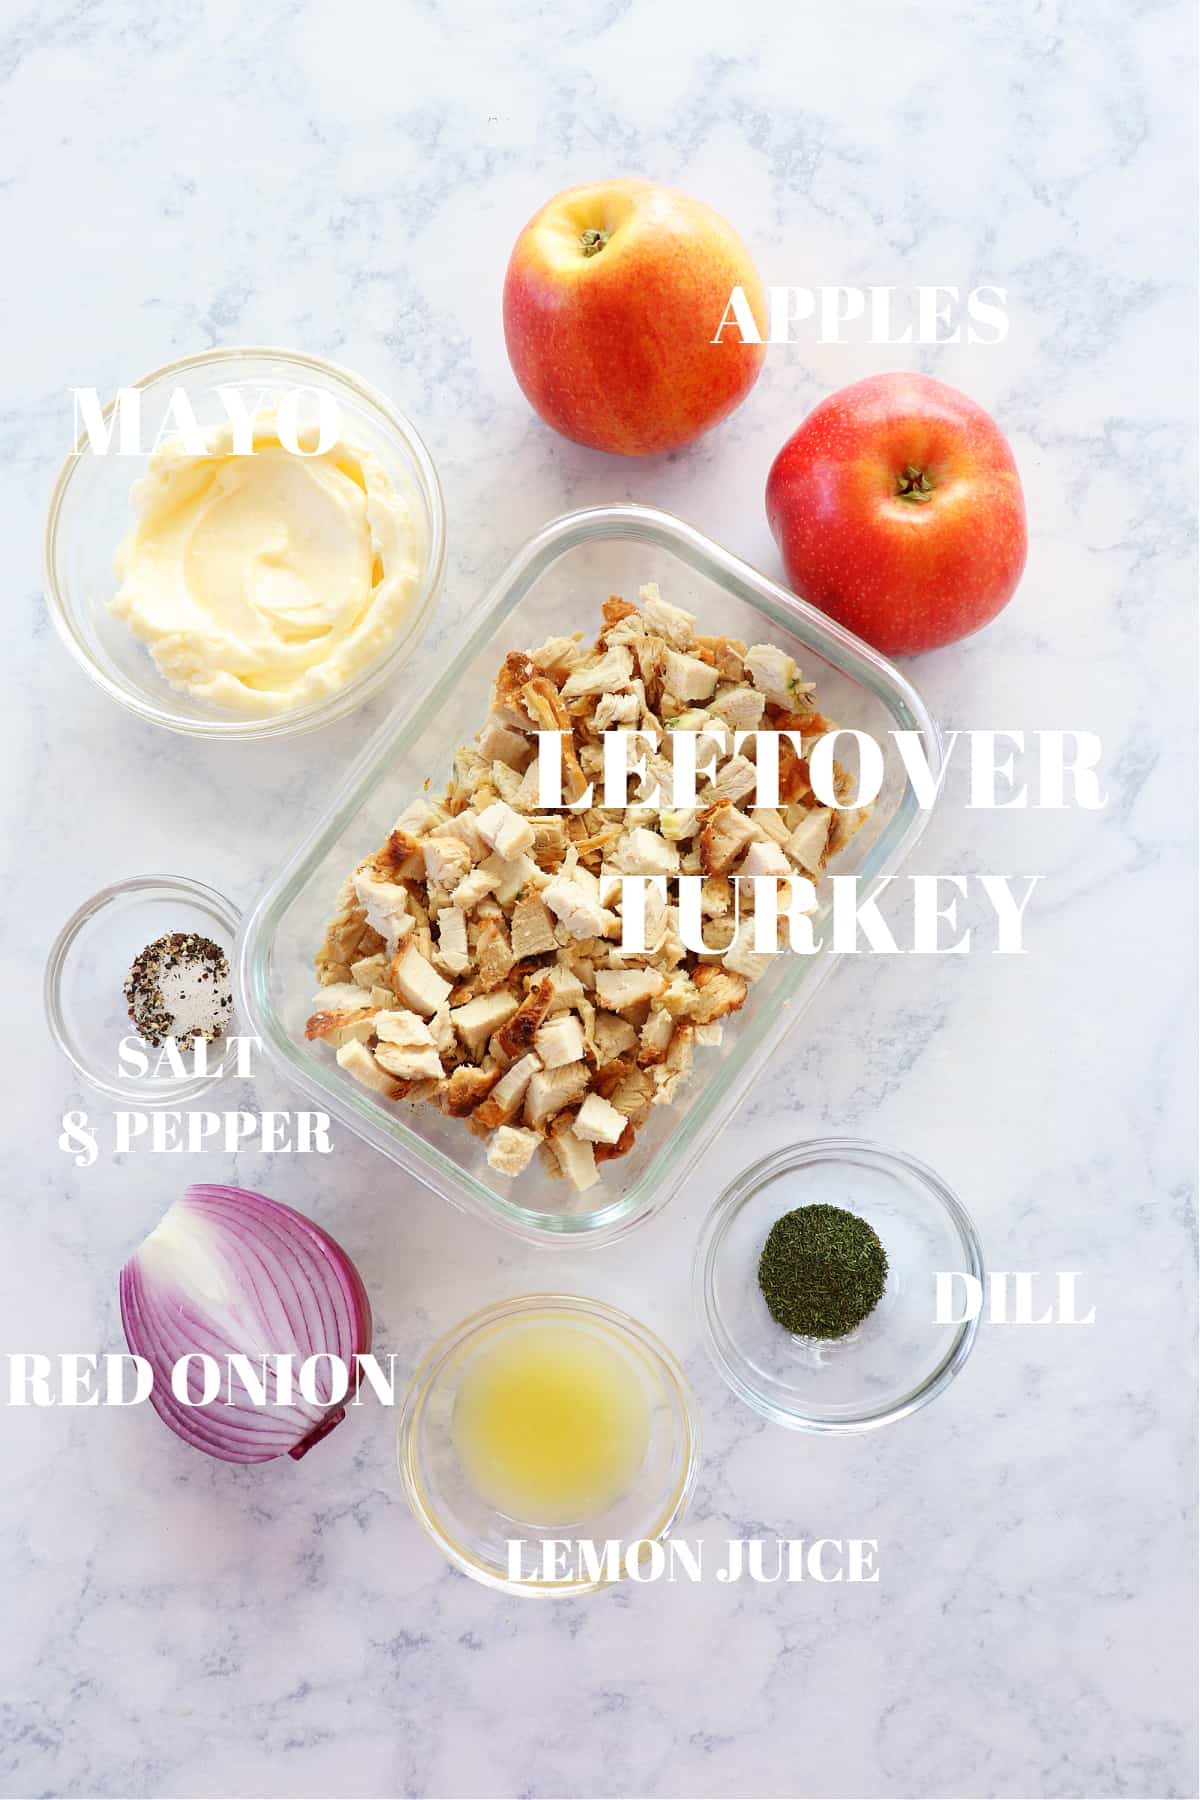 Ingredients for turkey salad on a board.